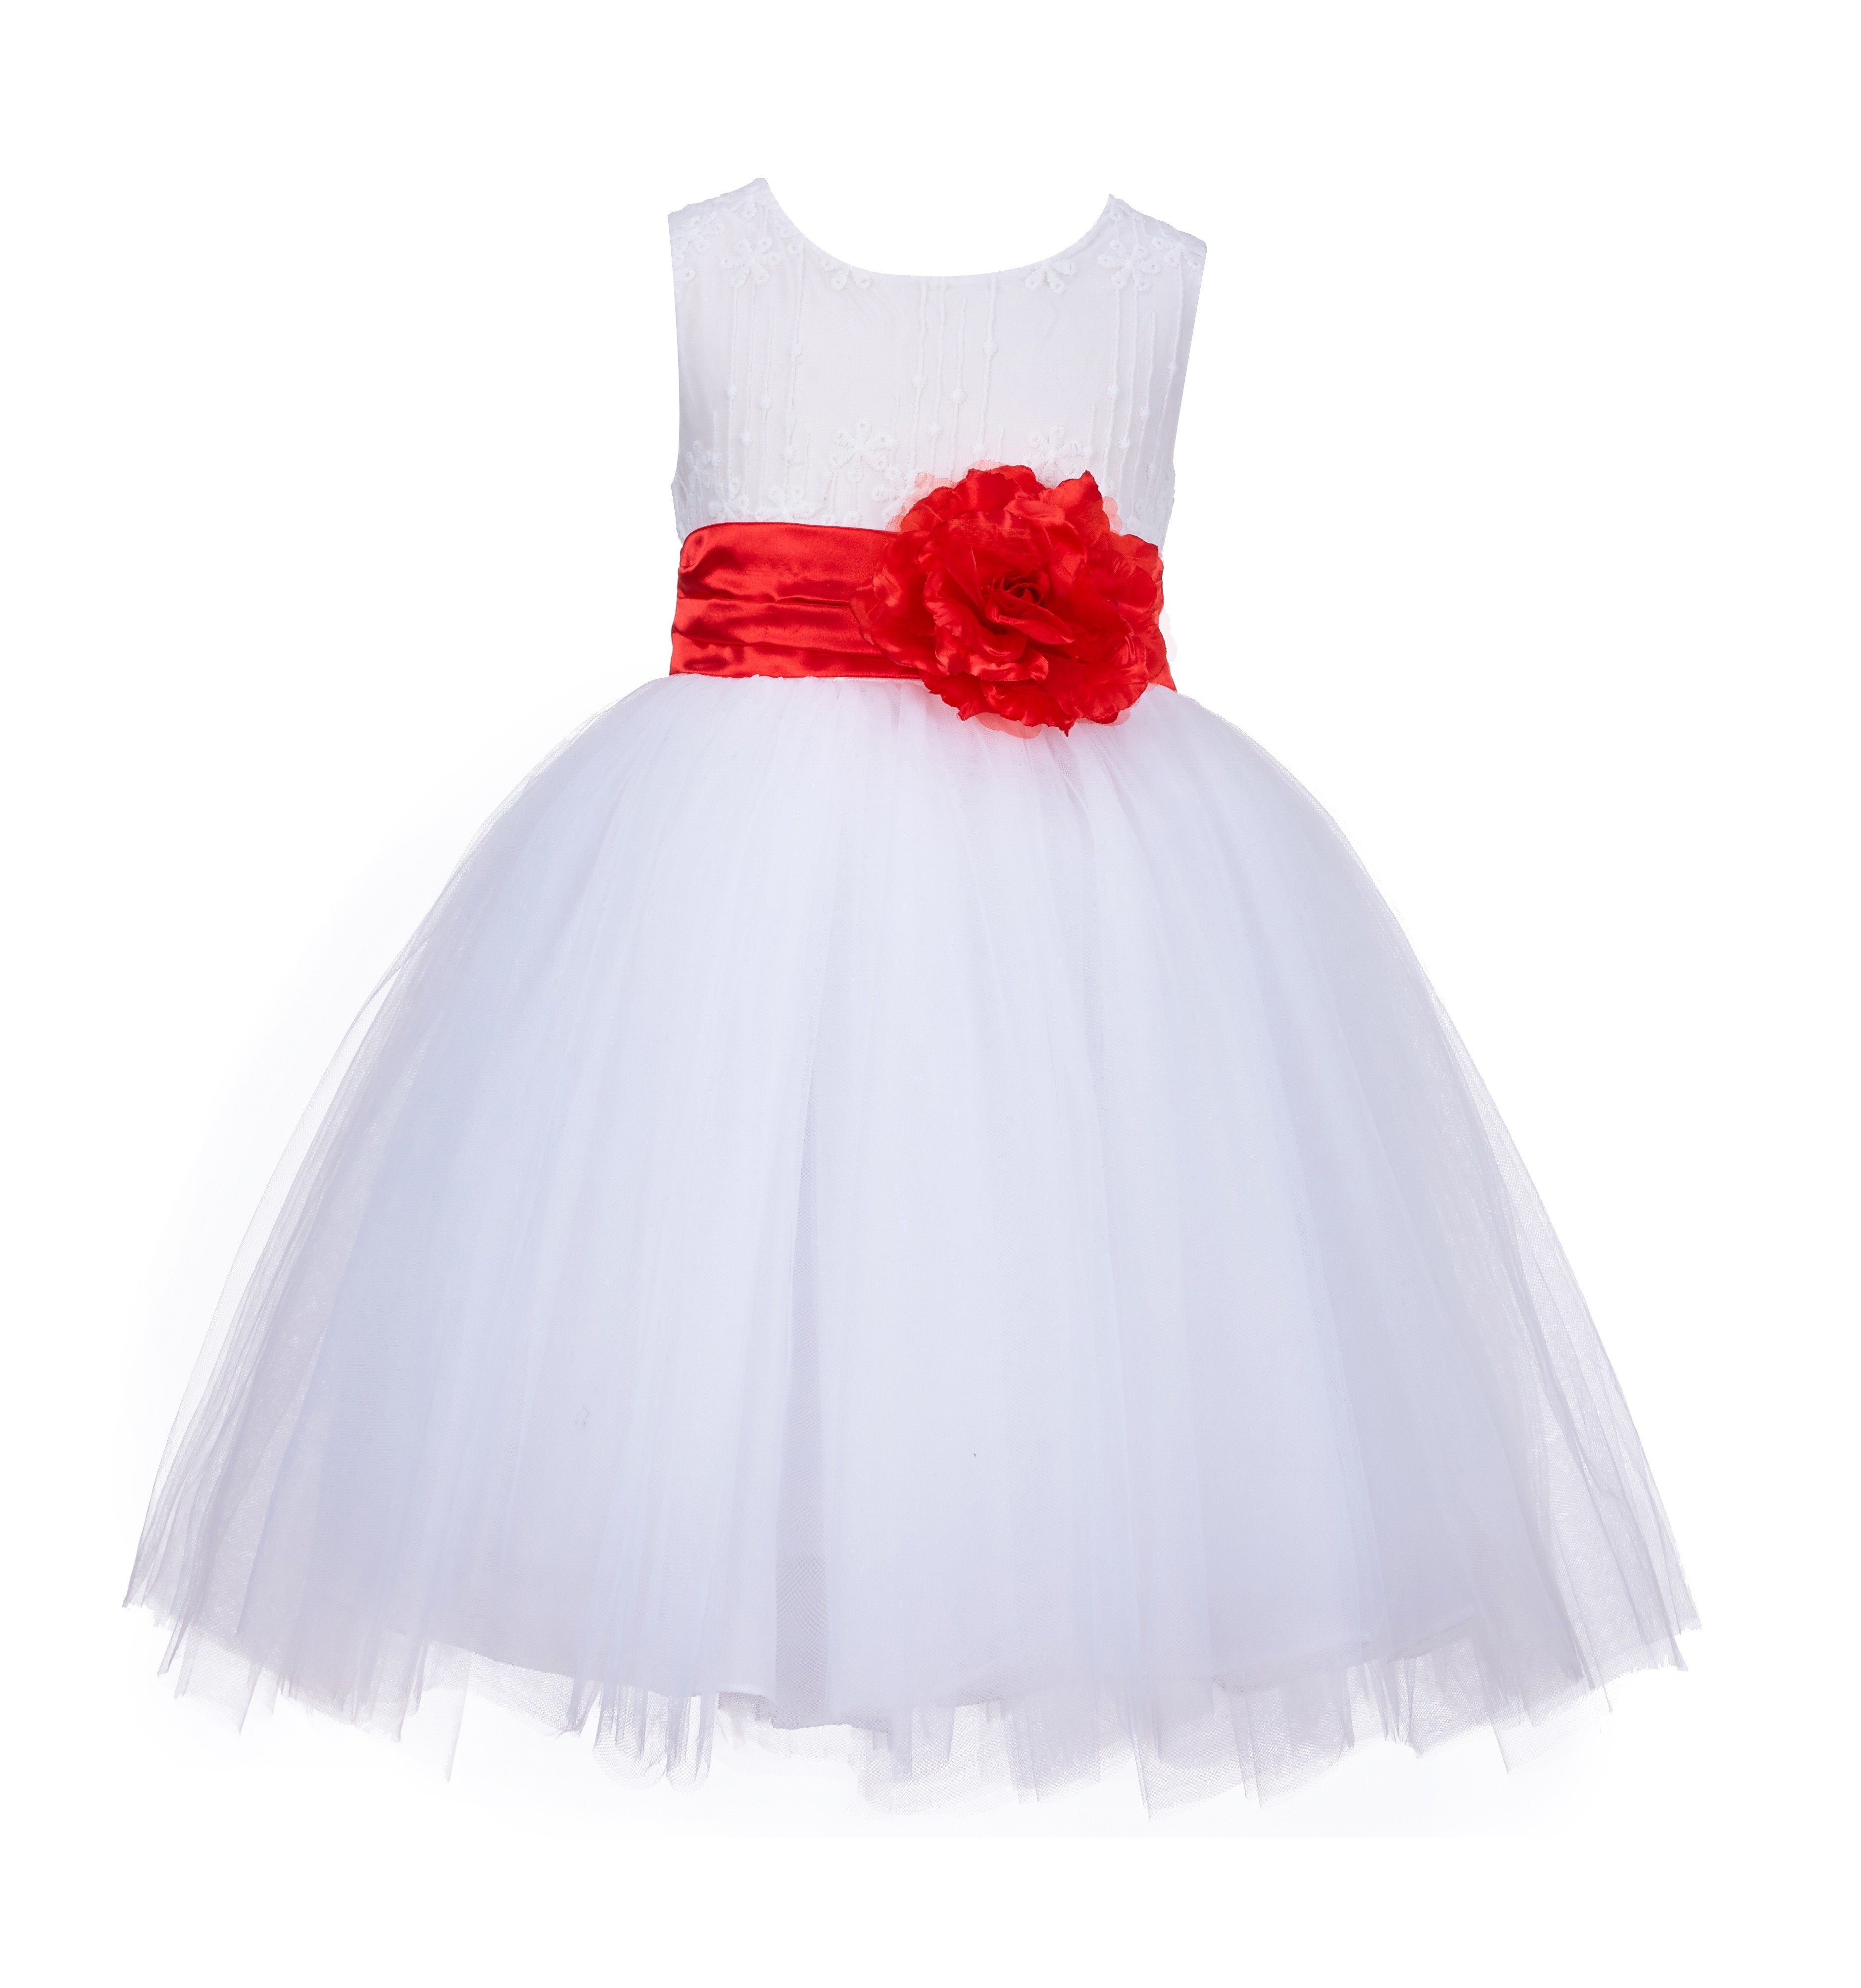 White/Red Lace Embroidery Tulle Flower Girl Dress Wedding 118